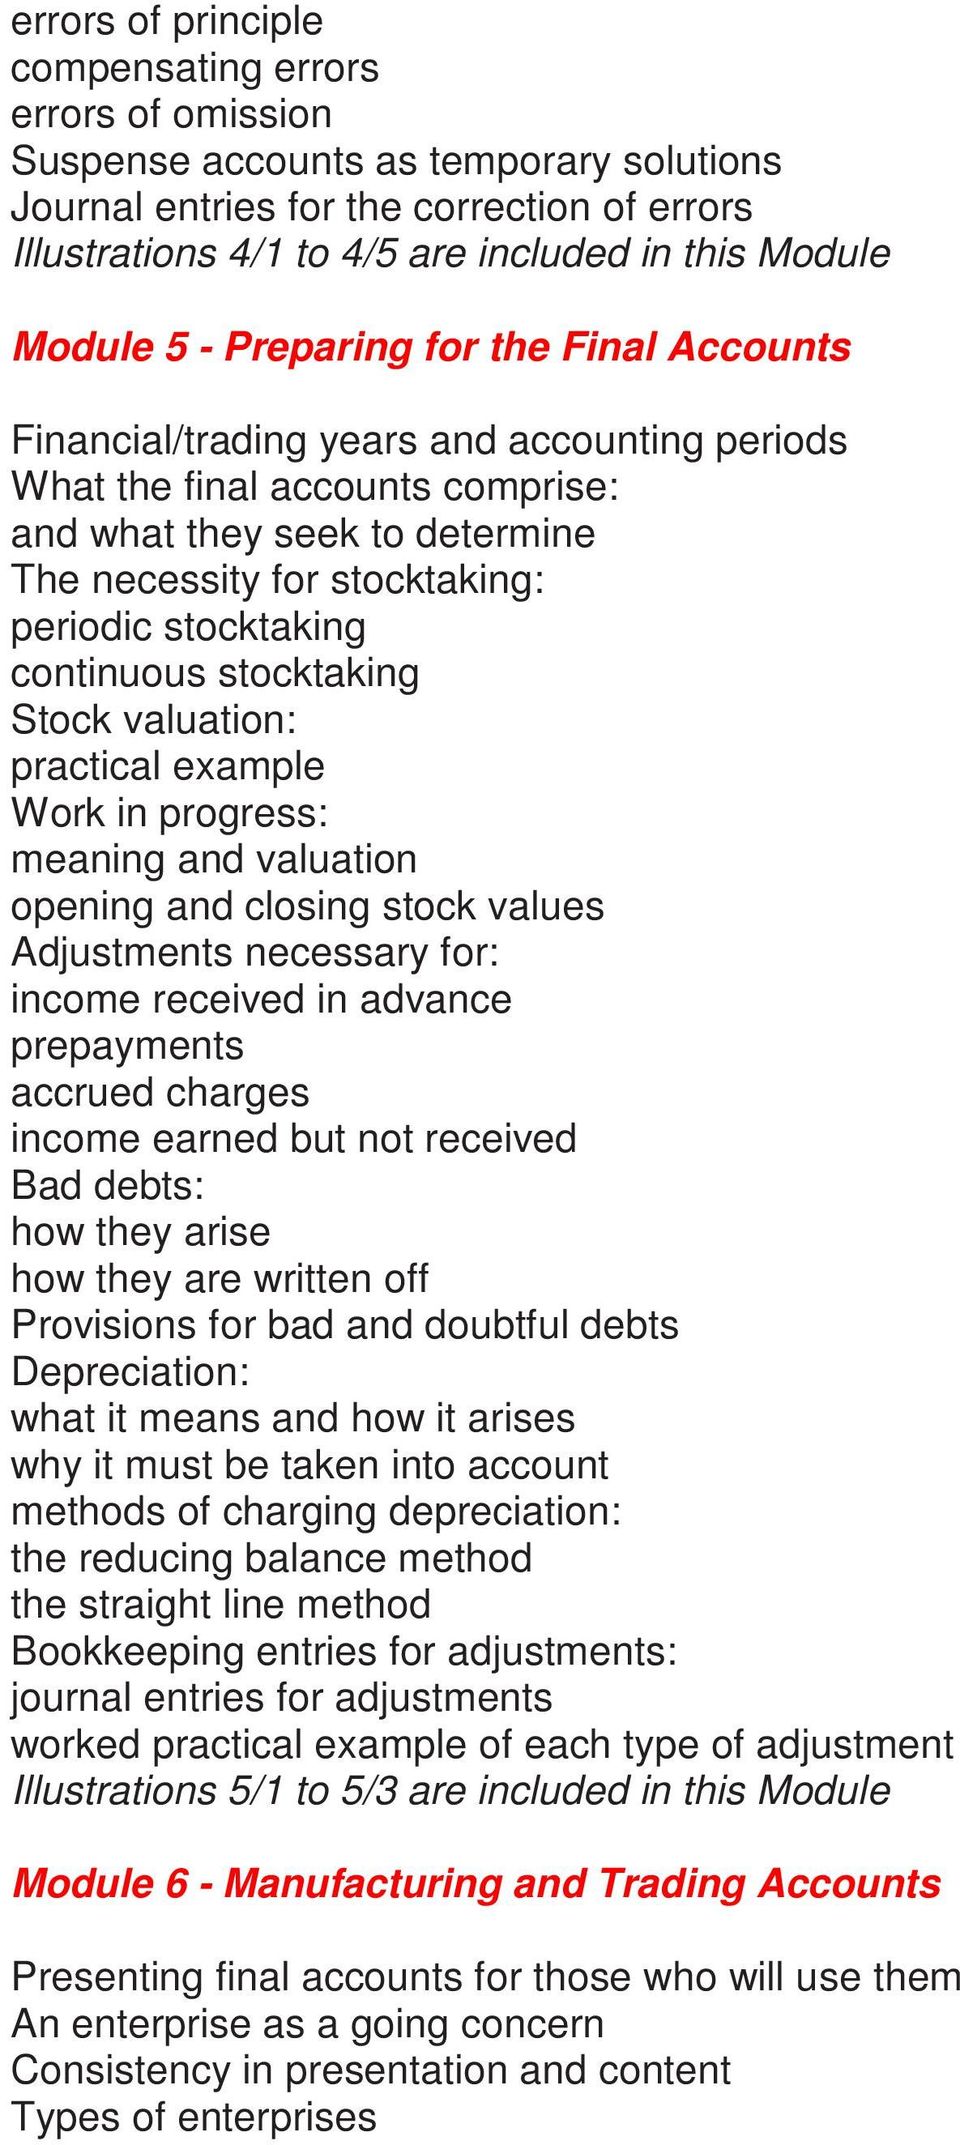 stocktaking continuous stocktaking Stock valuation: practical example Work in progress: meaning and valuation opening and closing stock values Adjustments necessary for: income received in advance